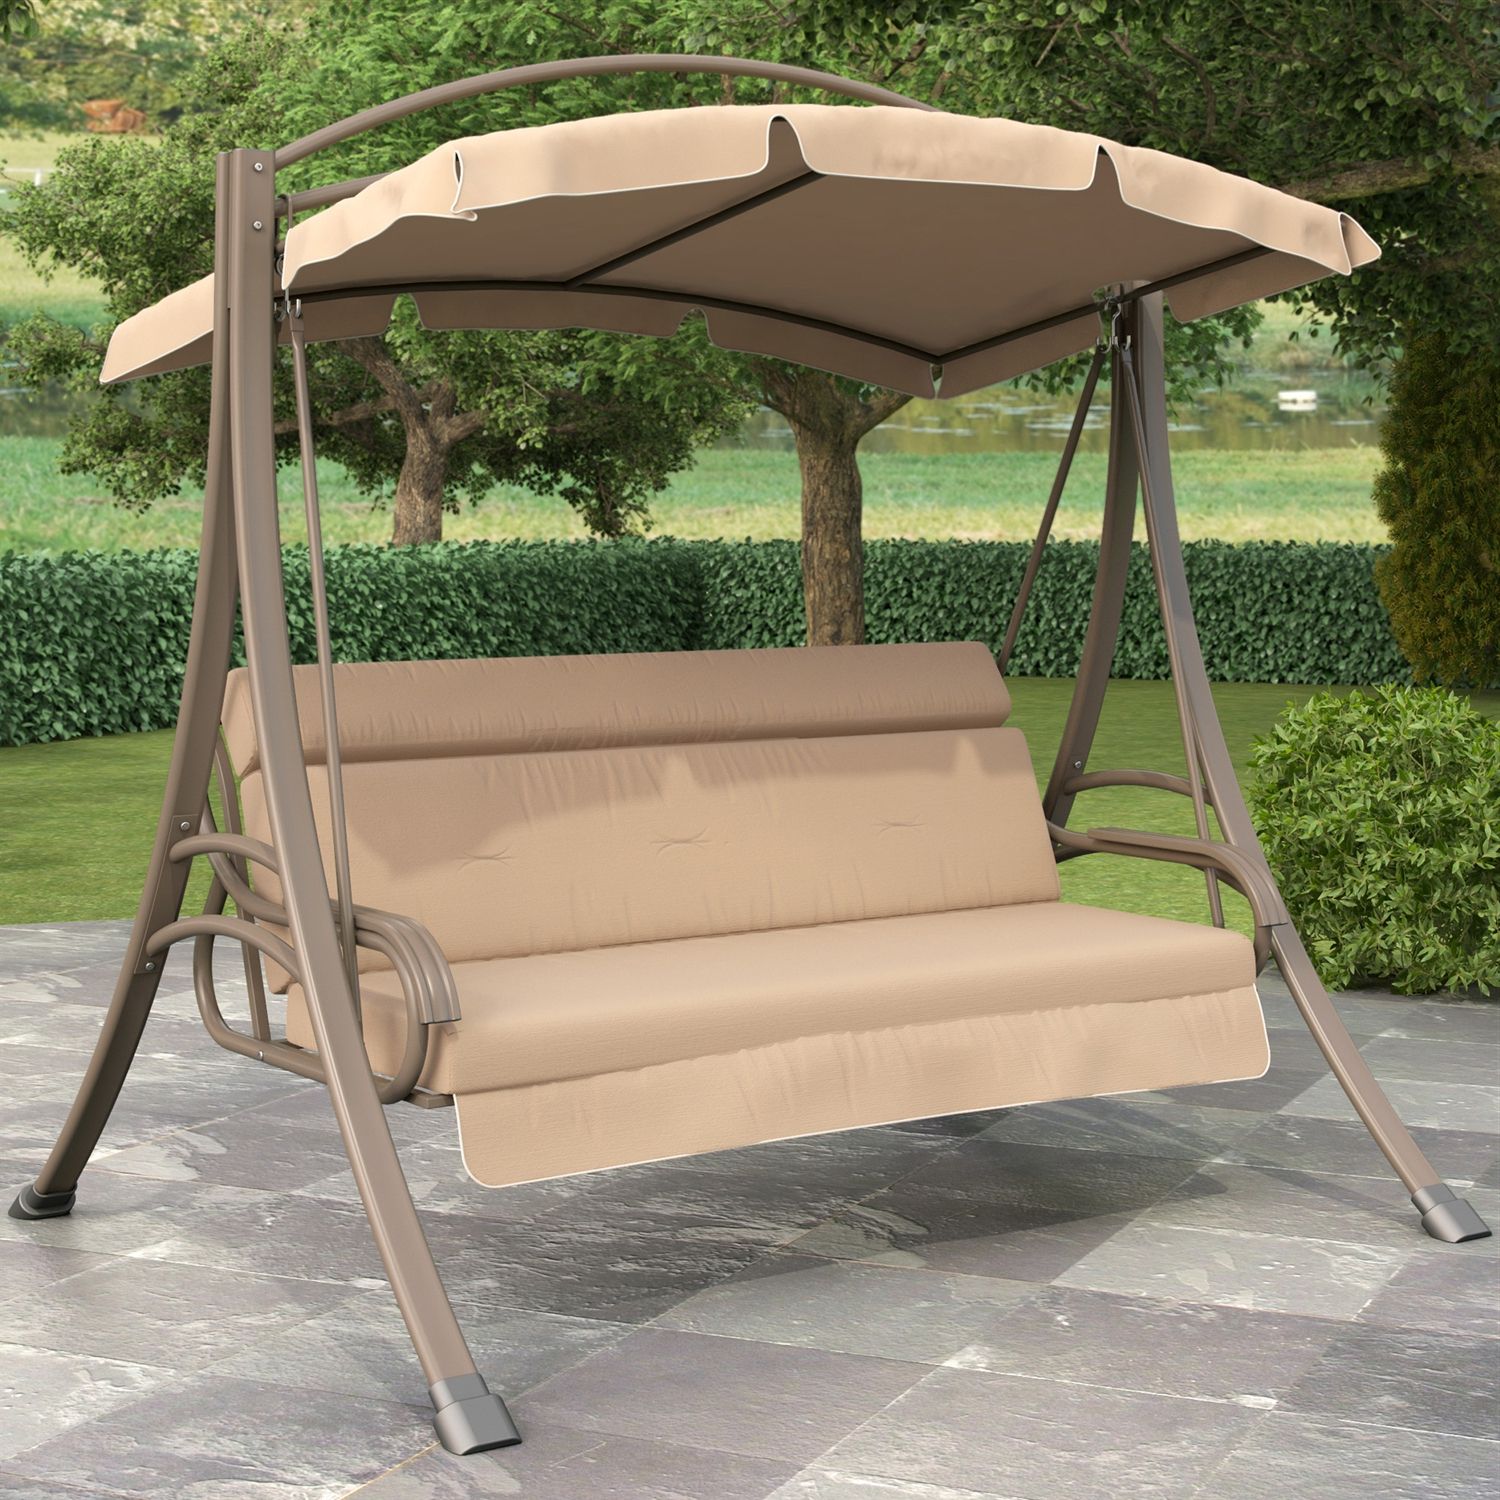 Outdoor Swing Chairs For Relaxing Regarding 3 Seat Pergola Swings (View 24 of 25)